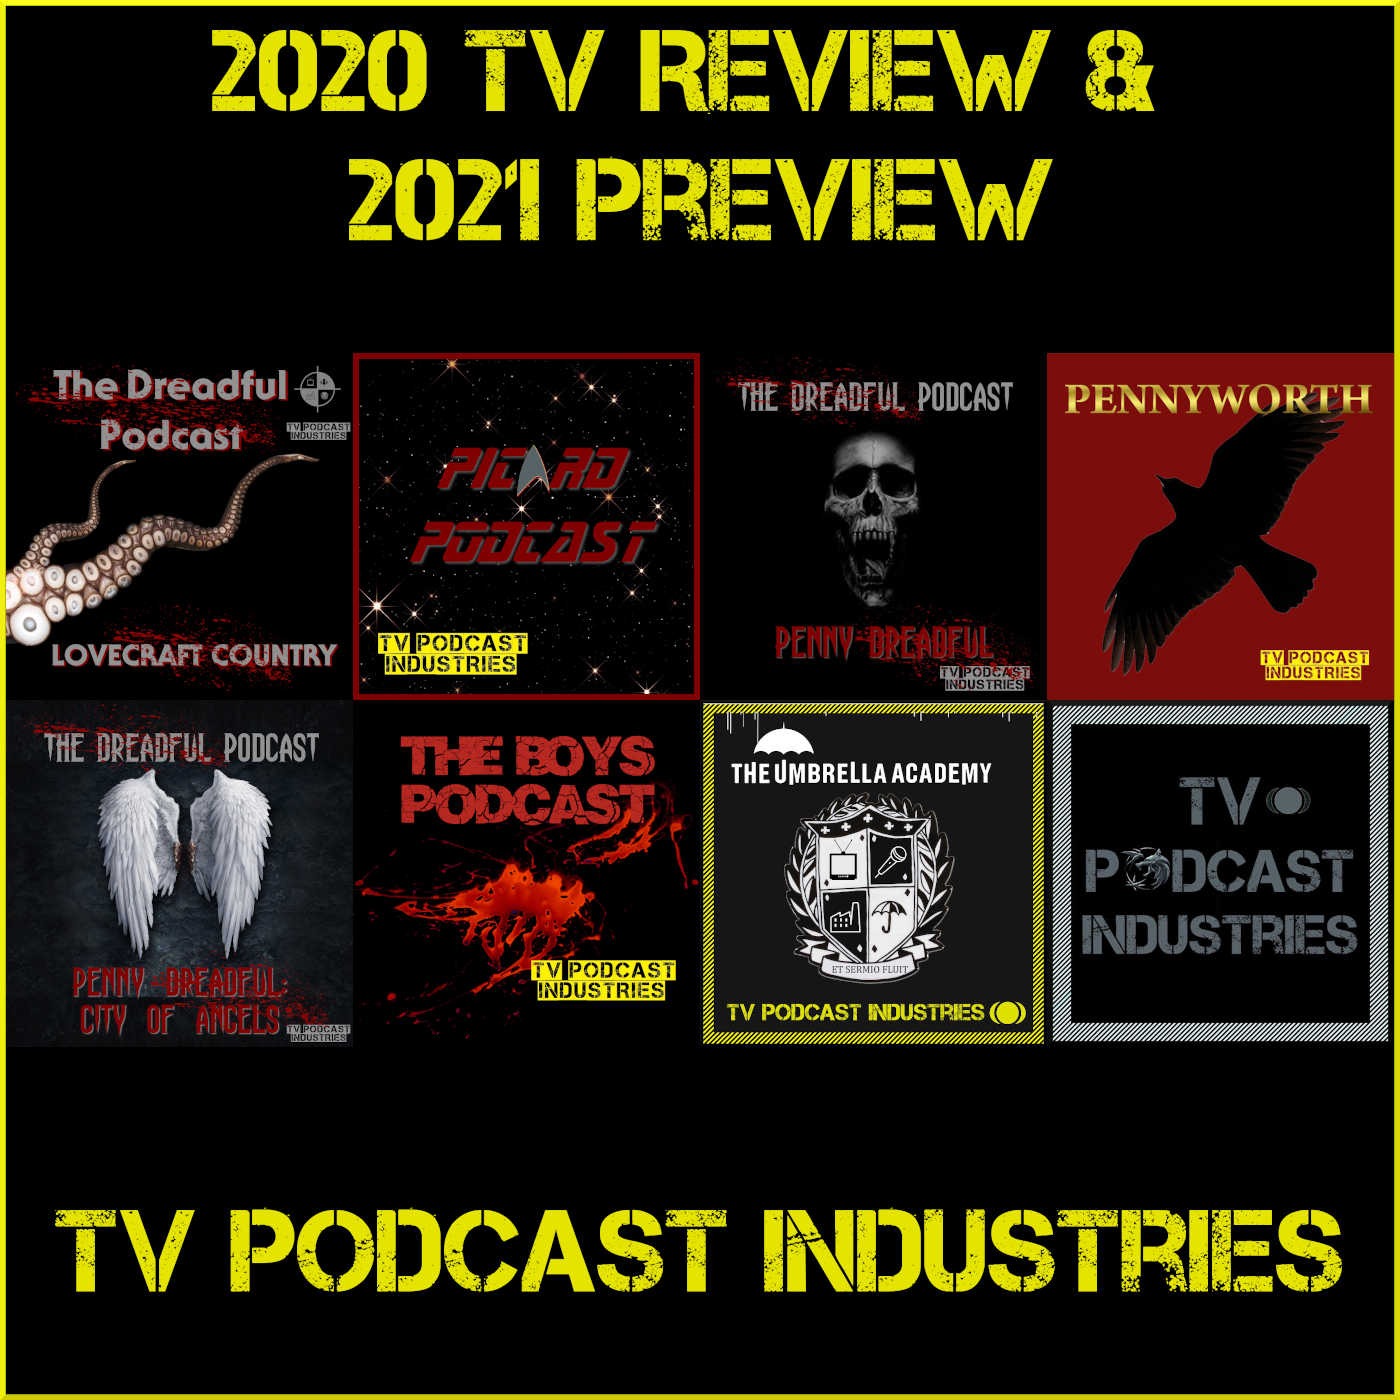 2020 TV Recap and 2021 Preview from TV Podcast Industries